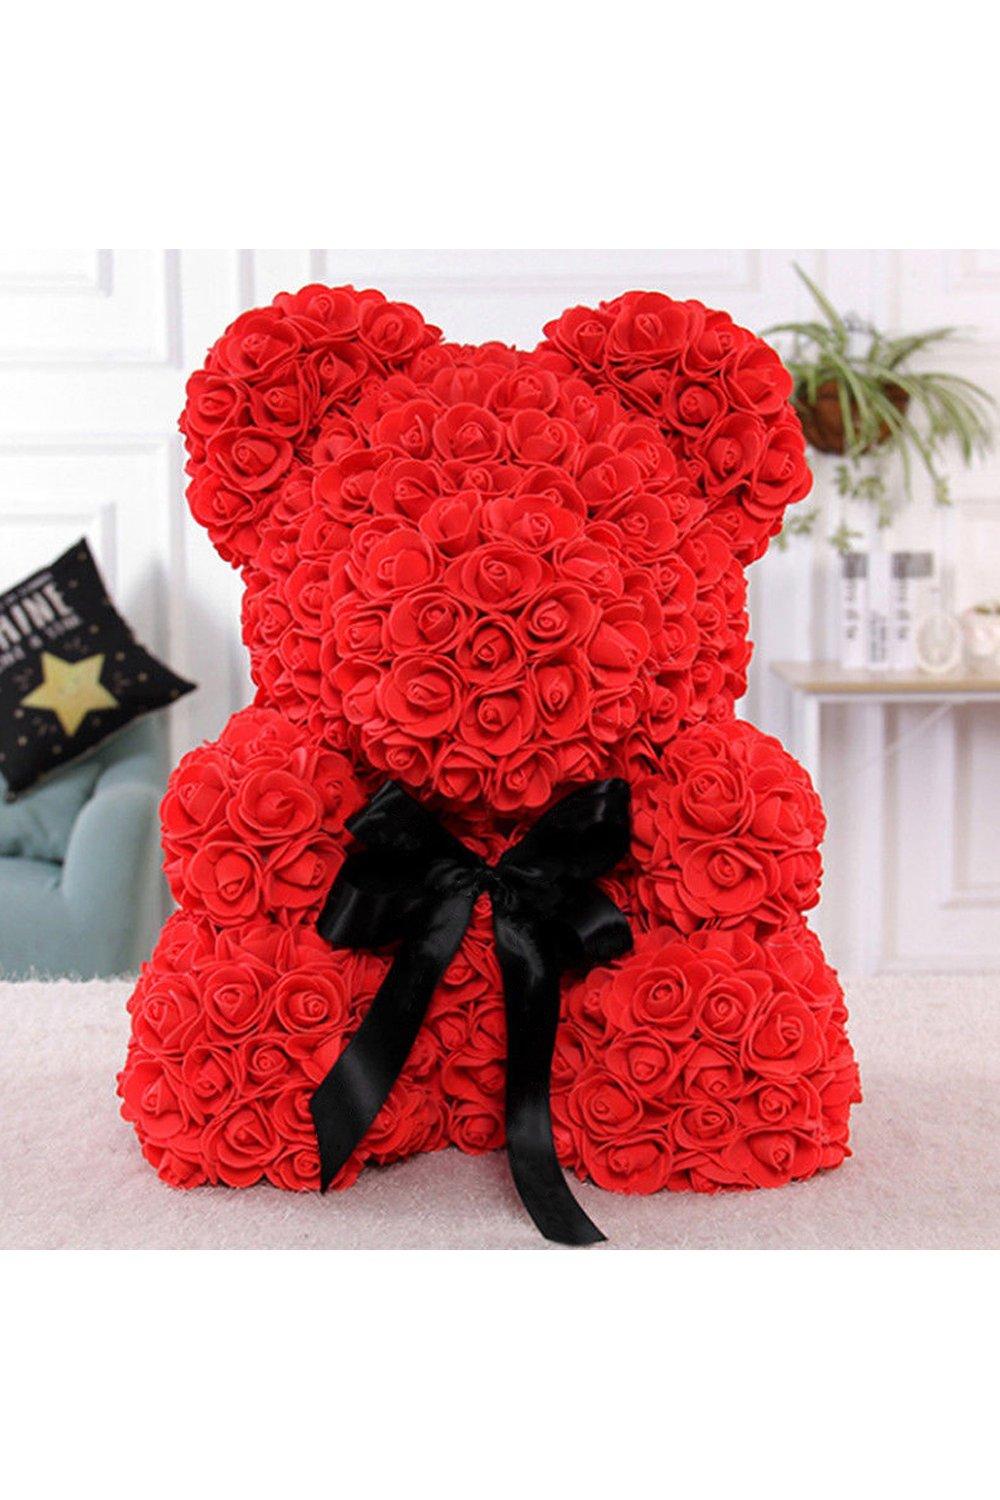 Artificial Rose Teddy Bear with Gift Box for Valentine's Day